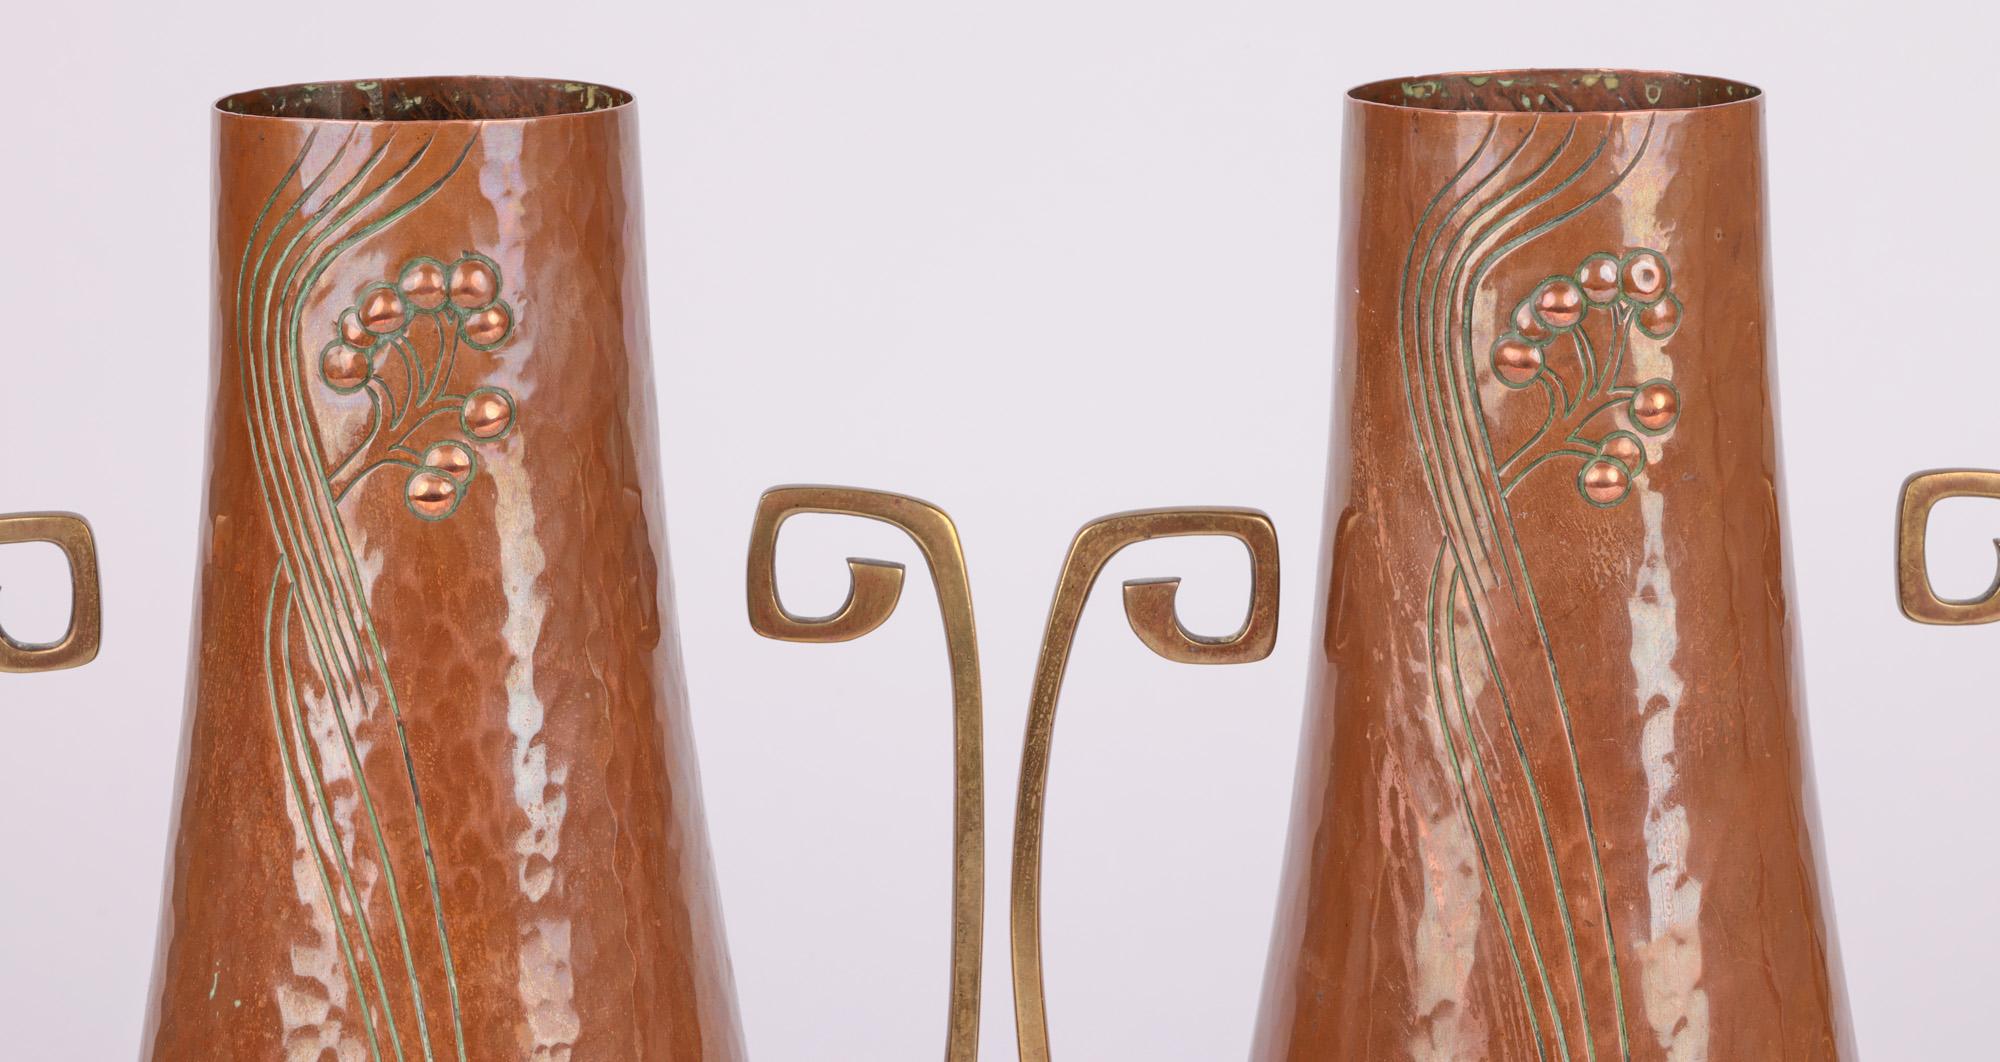 A very stylish Jugendstil pair German copper and brass vases by renowned makers WMF (Württembergische Metallwarenfabrik) and dating from around 1900. The tall and elegantly shaped vases have copper bodies standing raised on narrow pinched bases with